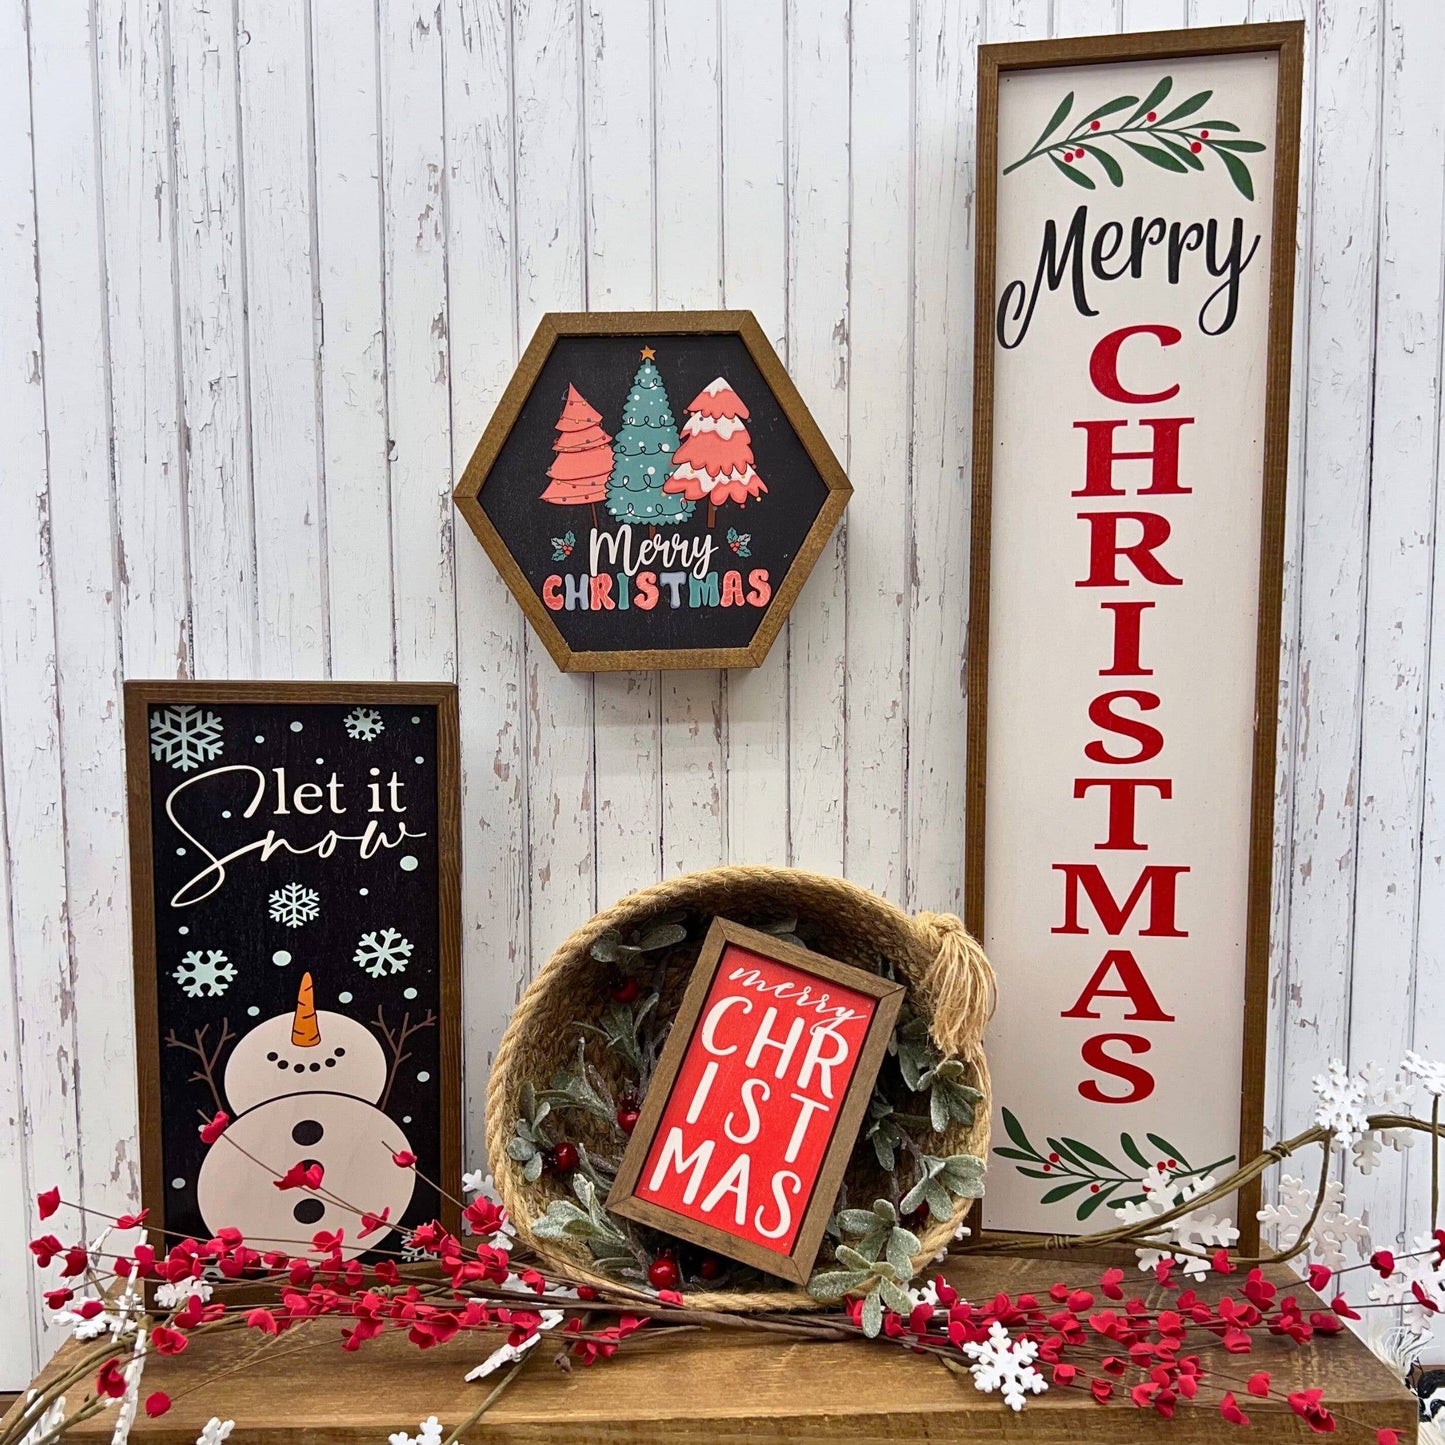 12X6 Let It Snow Winter Holiday Signs - Home Decor